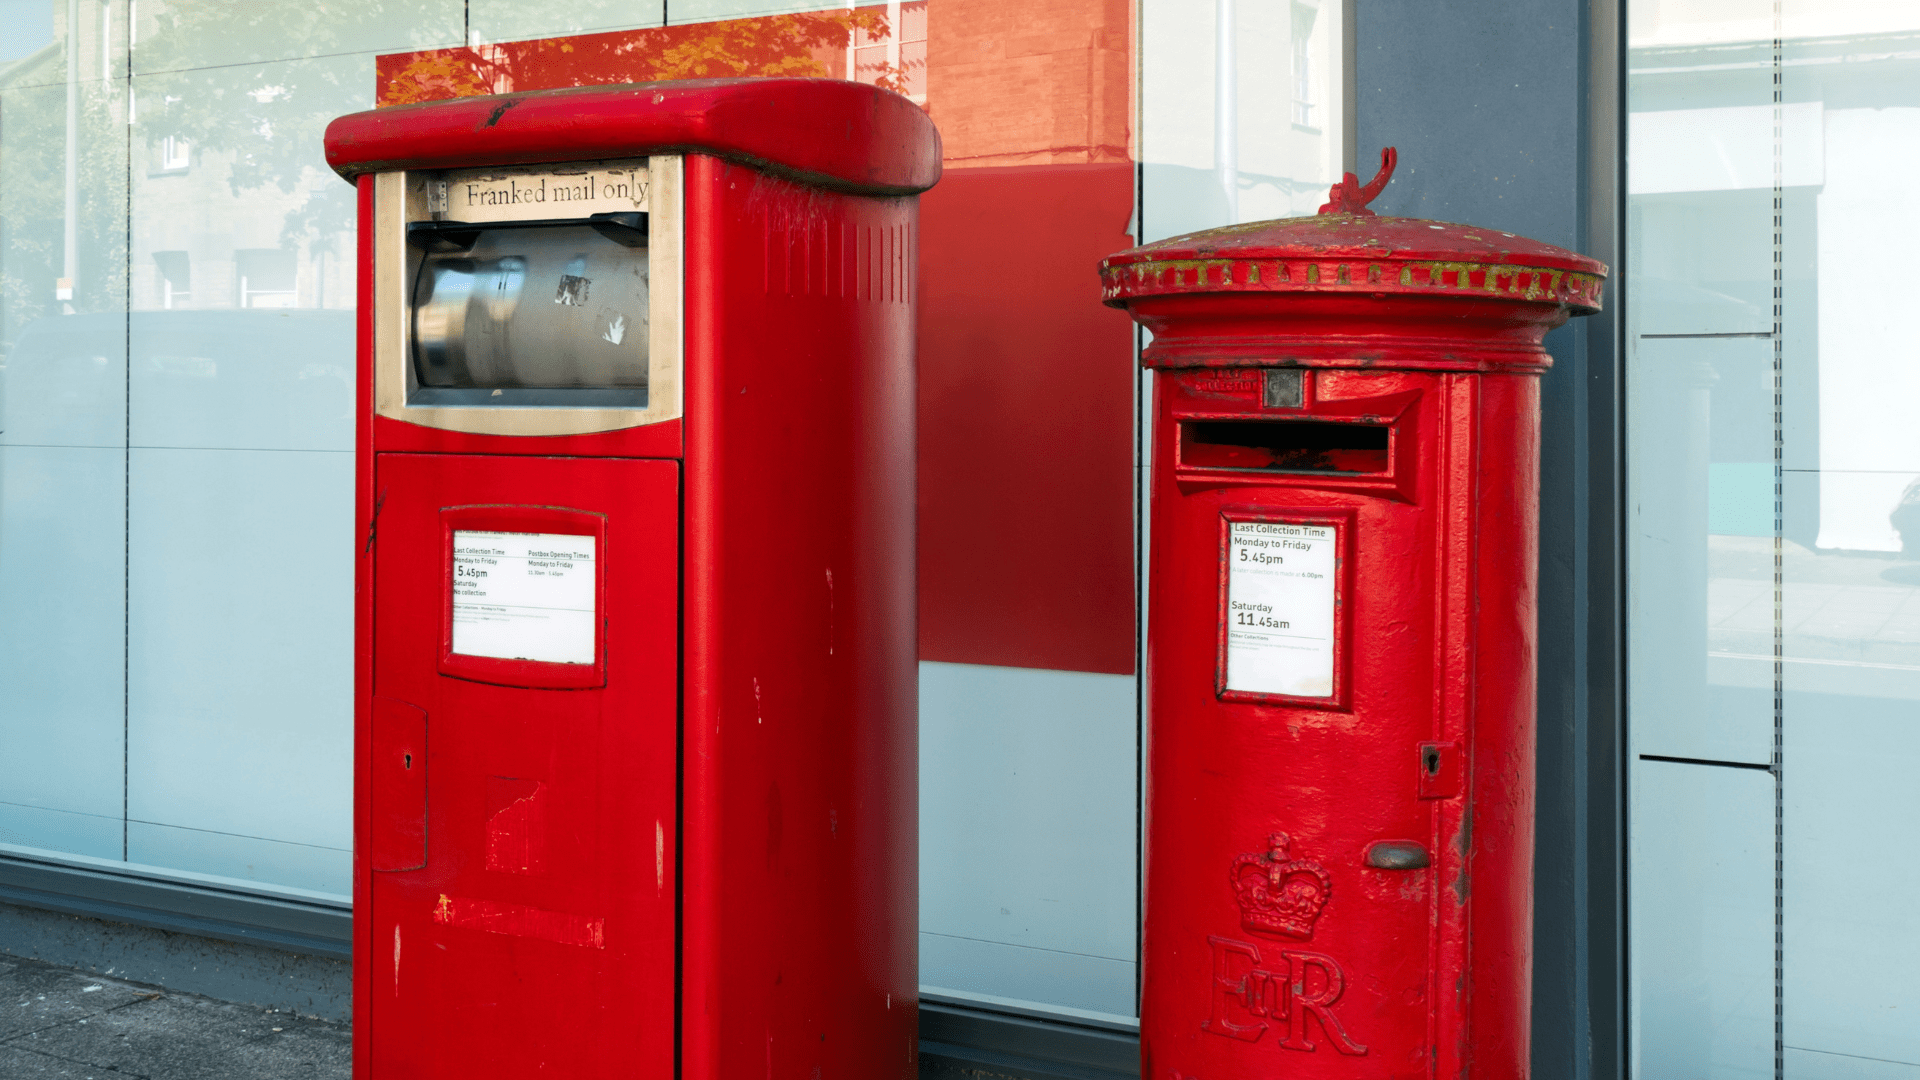 Postboxes for franked and normal British mail